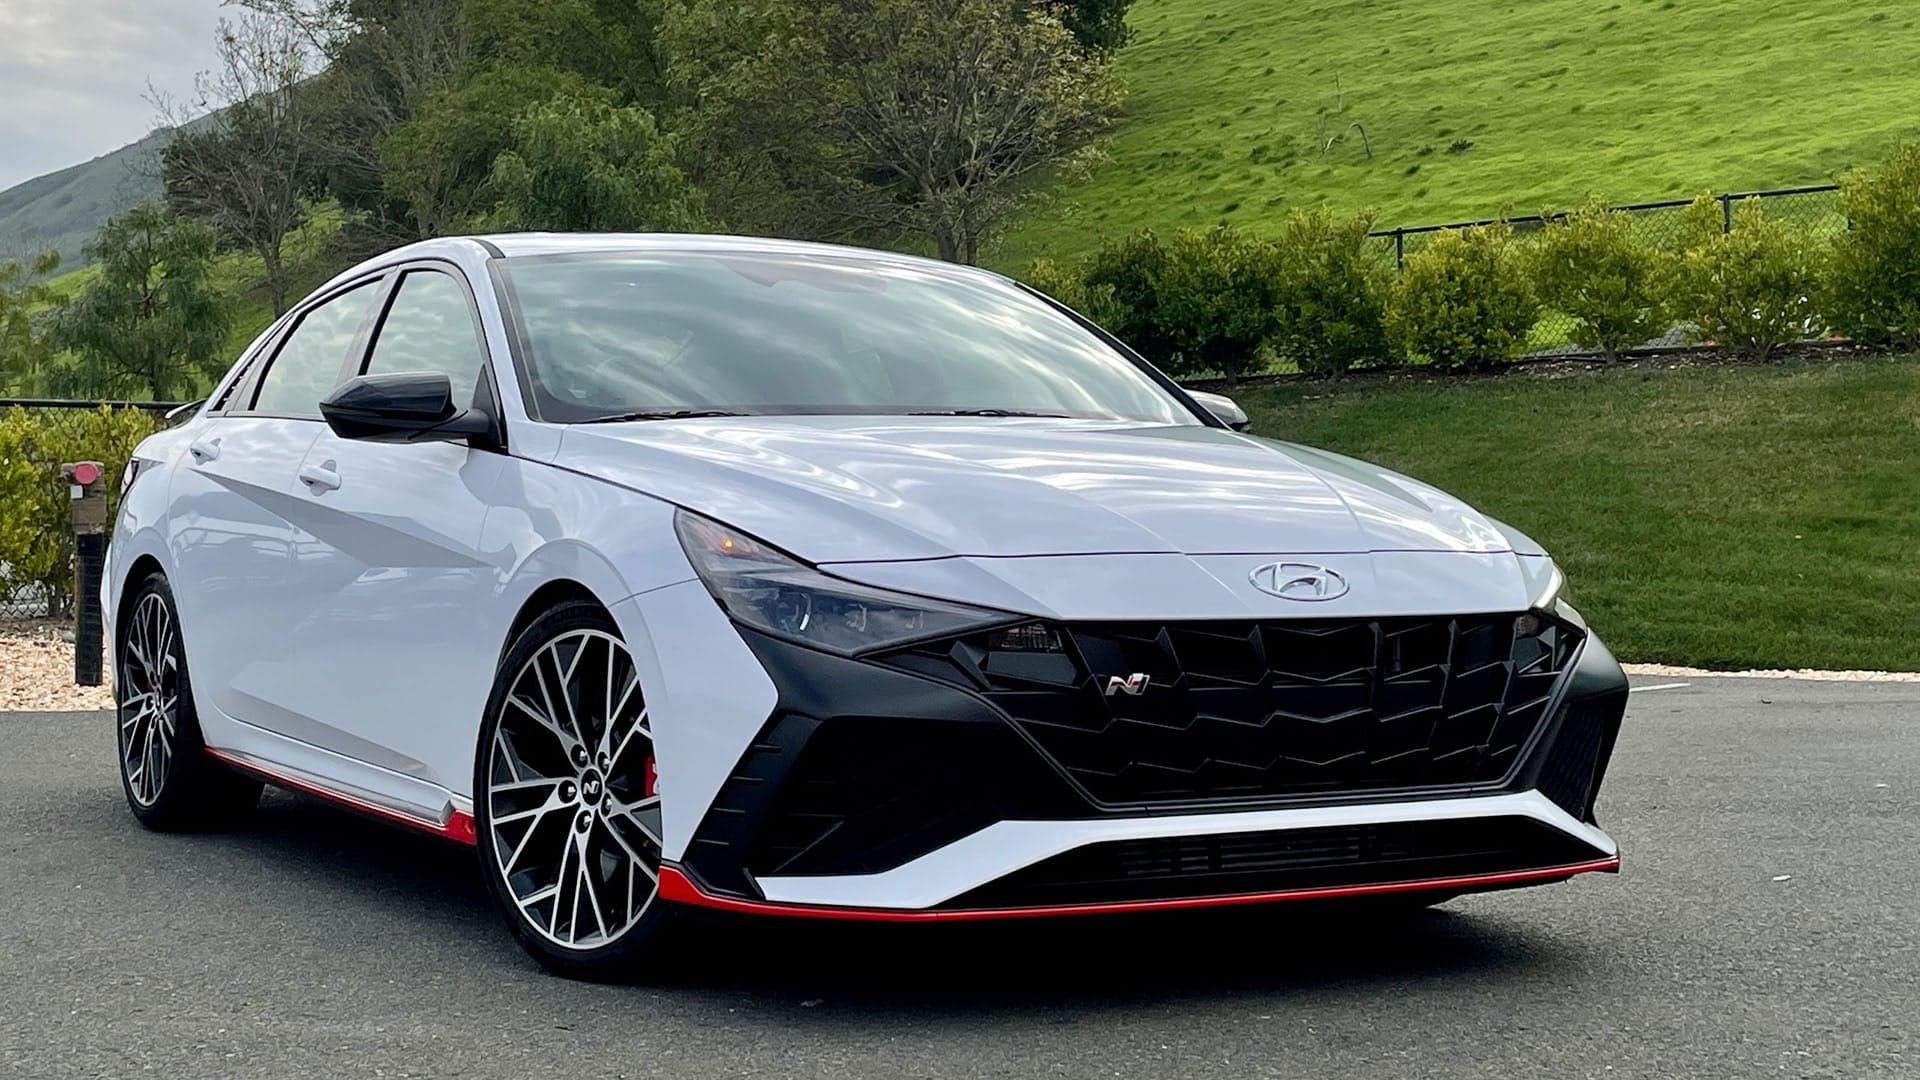 2022 Hyundai Elantra N First Drive Review: You Can’t Spell Fun Without N